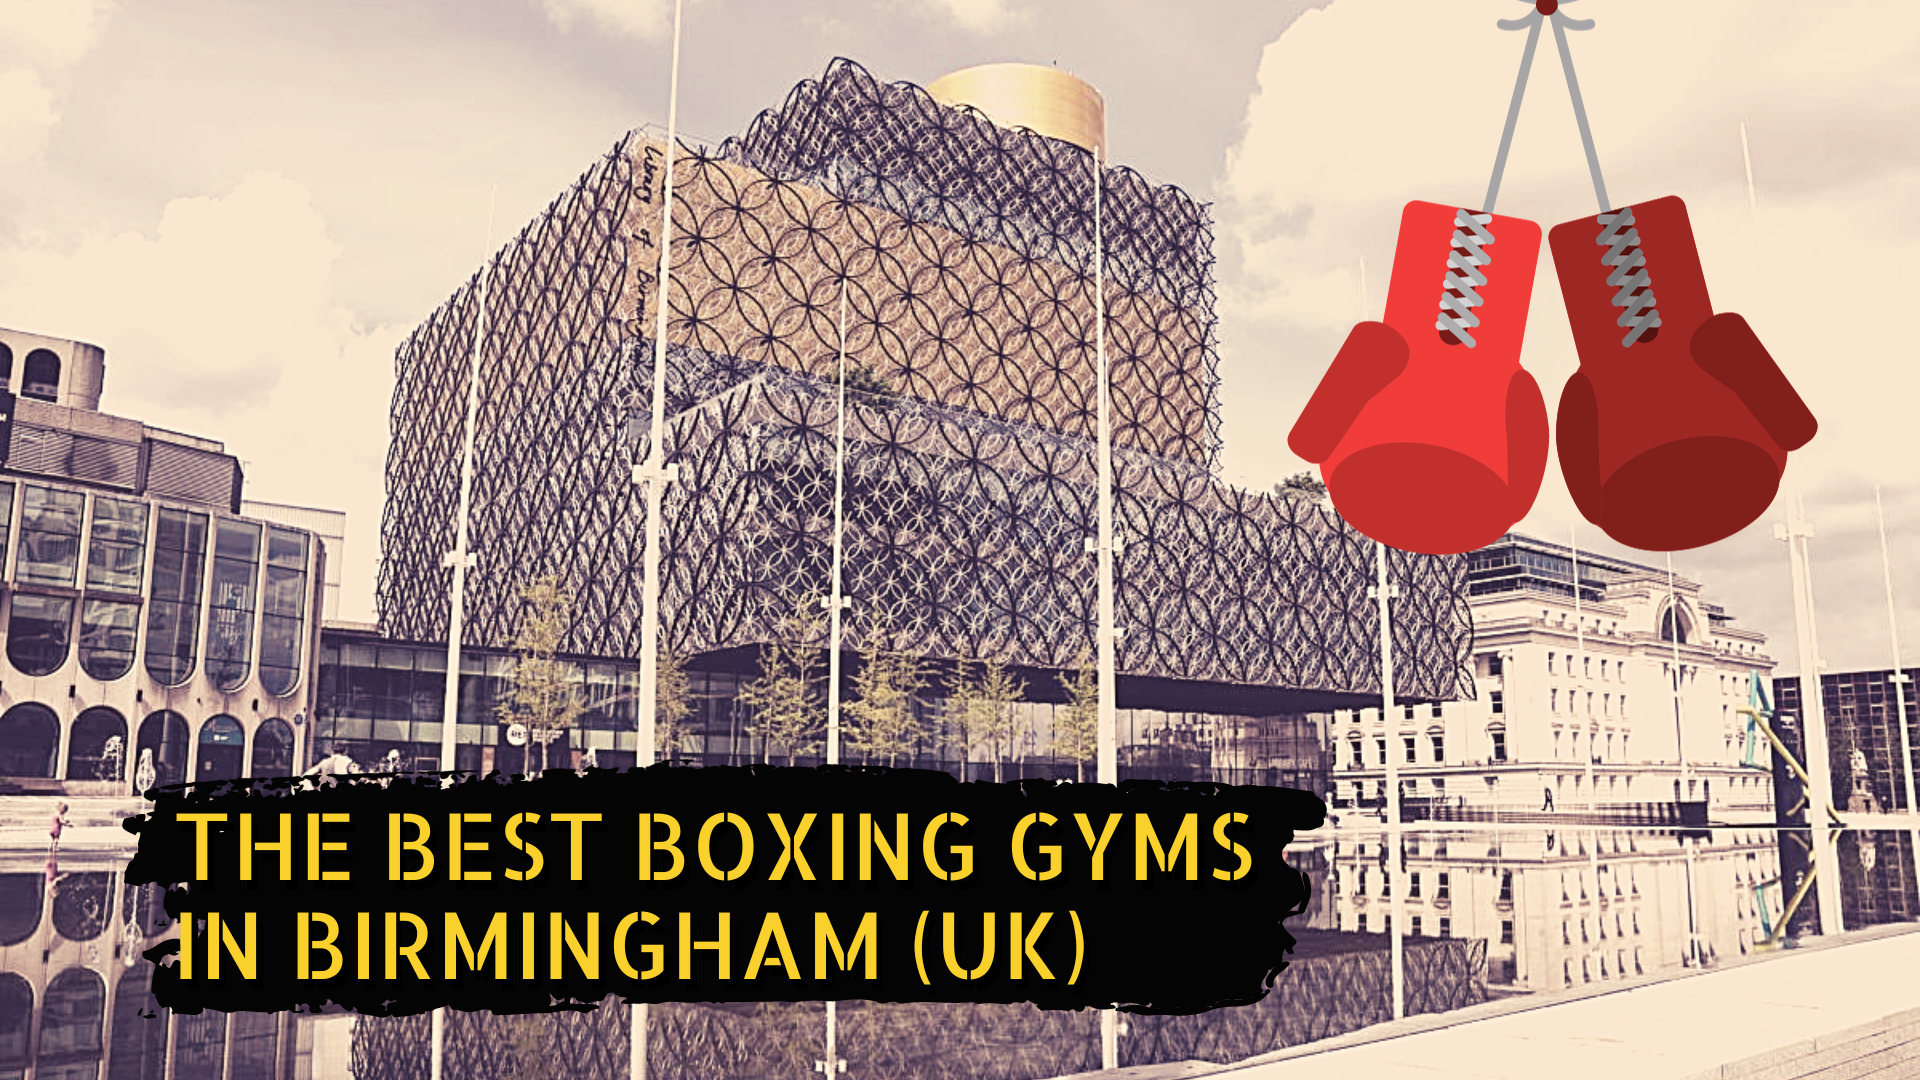 Birmingham library, some boxing gloves, and a the title the best boxing gyms in Birmingham